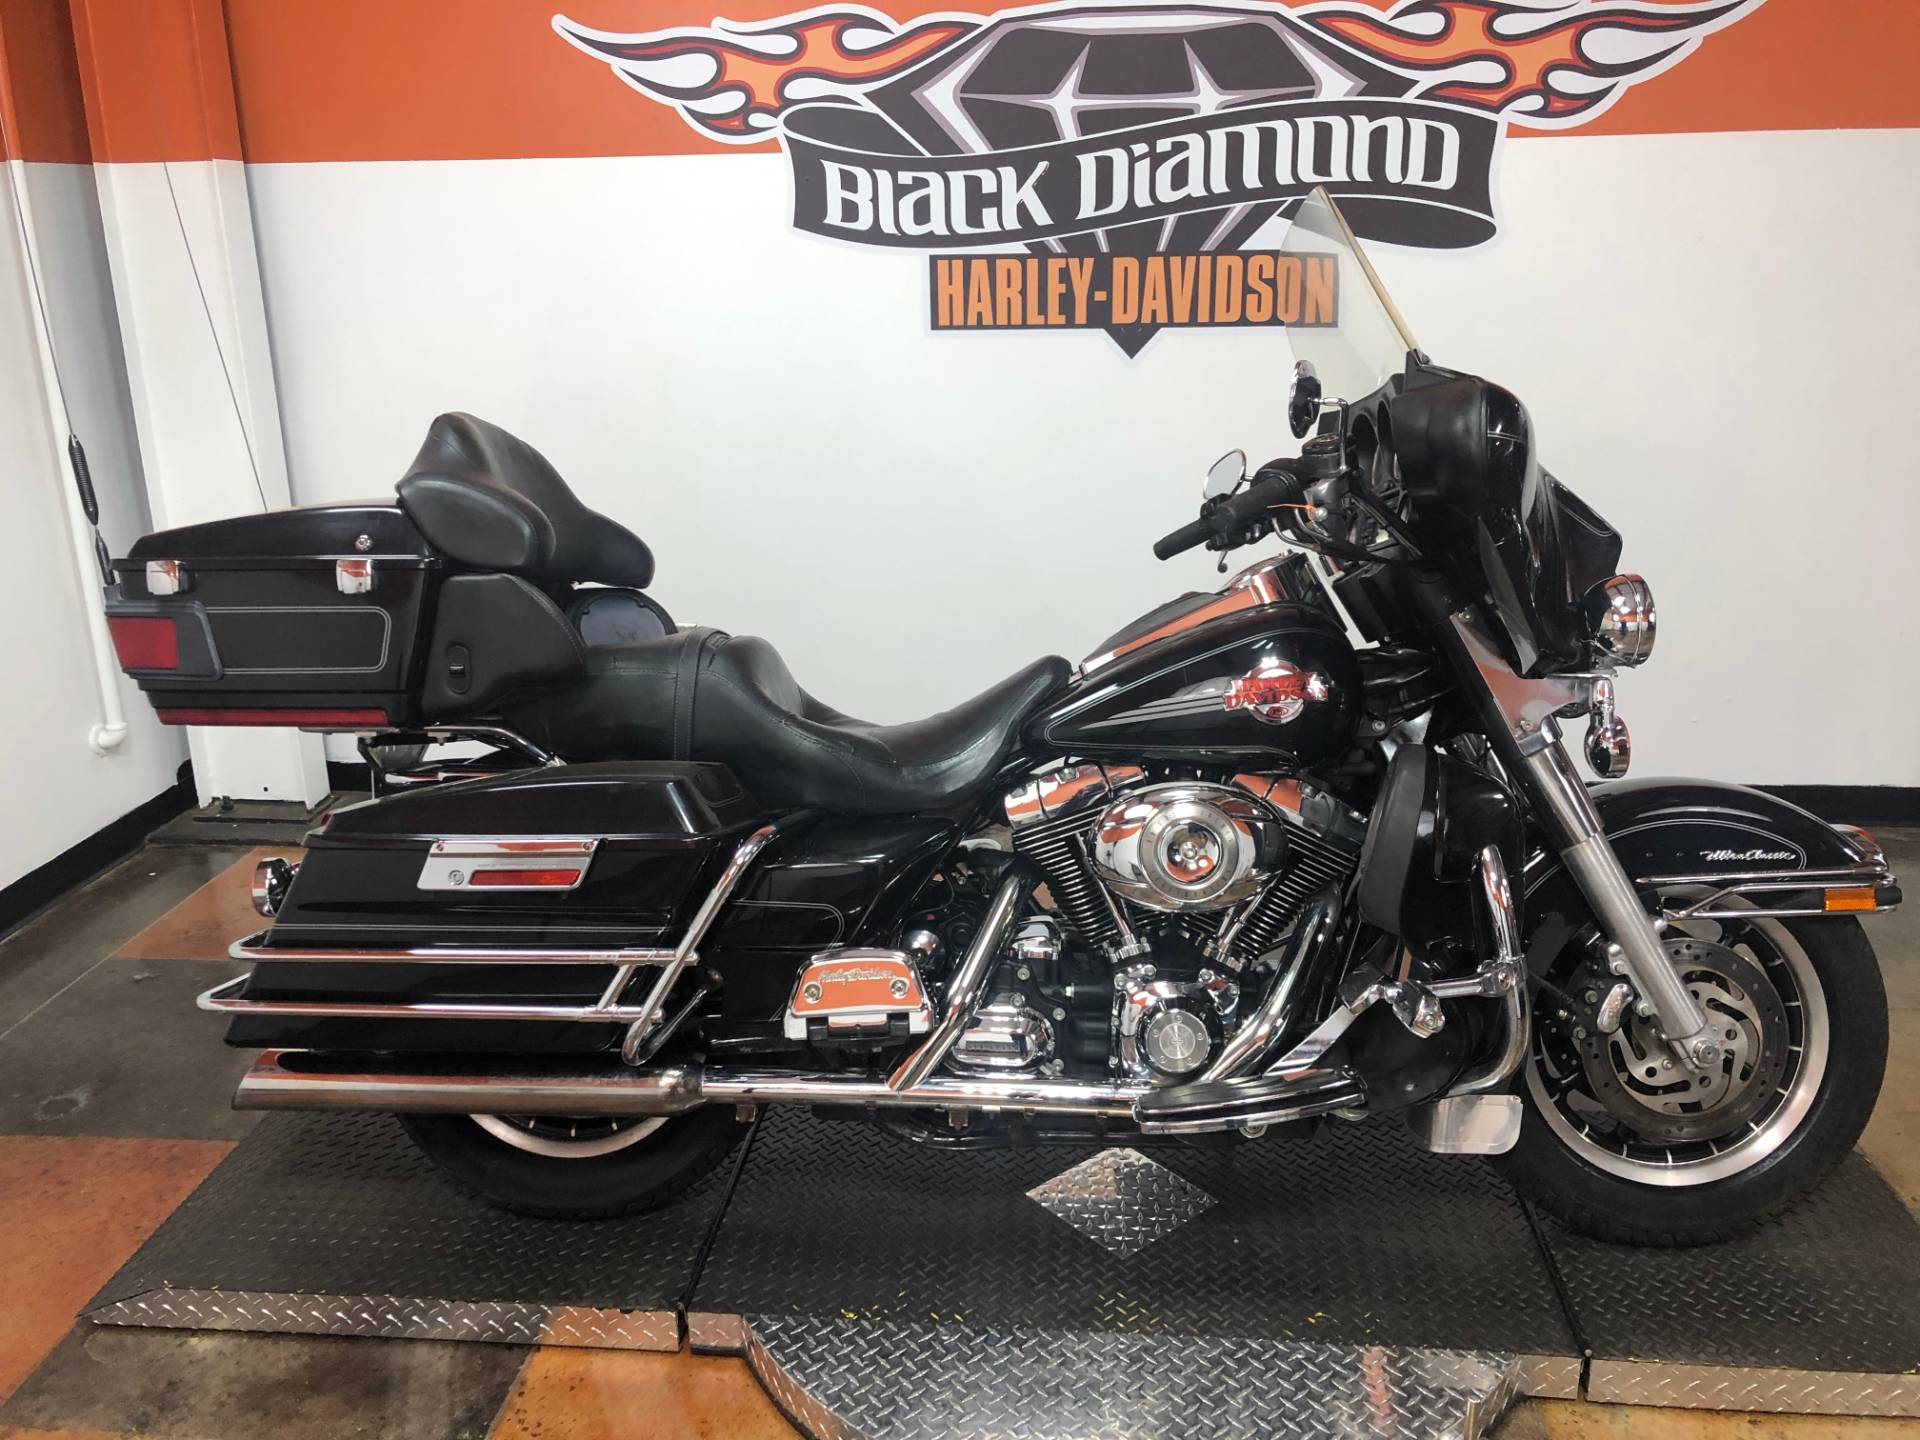 Used 2007 Harley Davidson Ultra Classic Electra Glide Deep Cobalt Pearl Motorcycles In Marion Il U667275